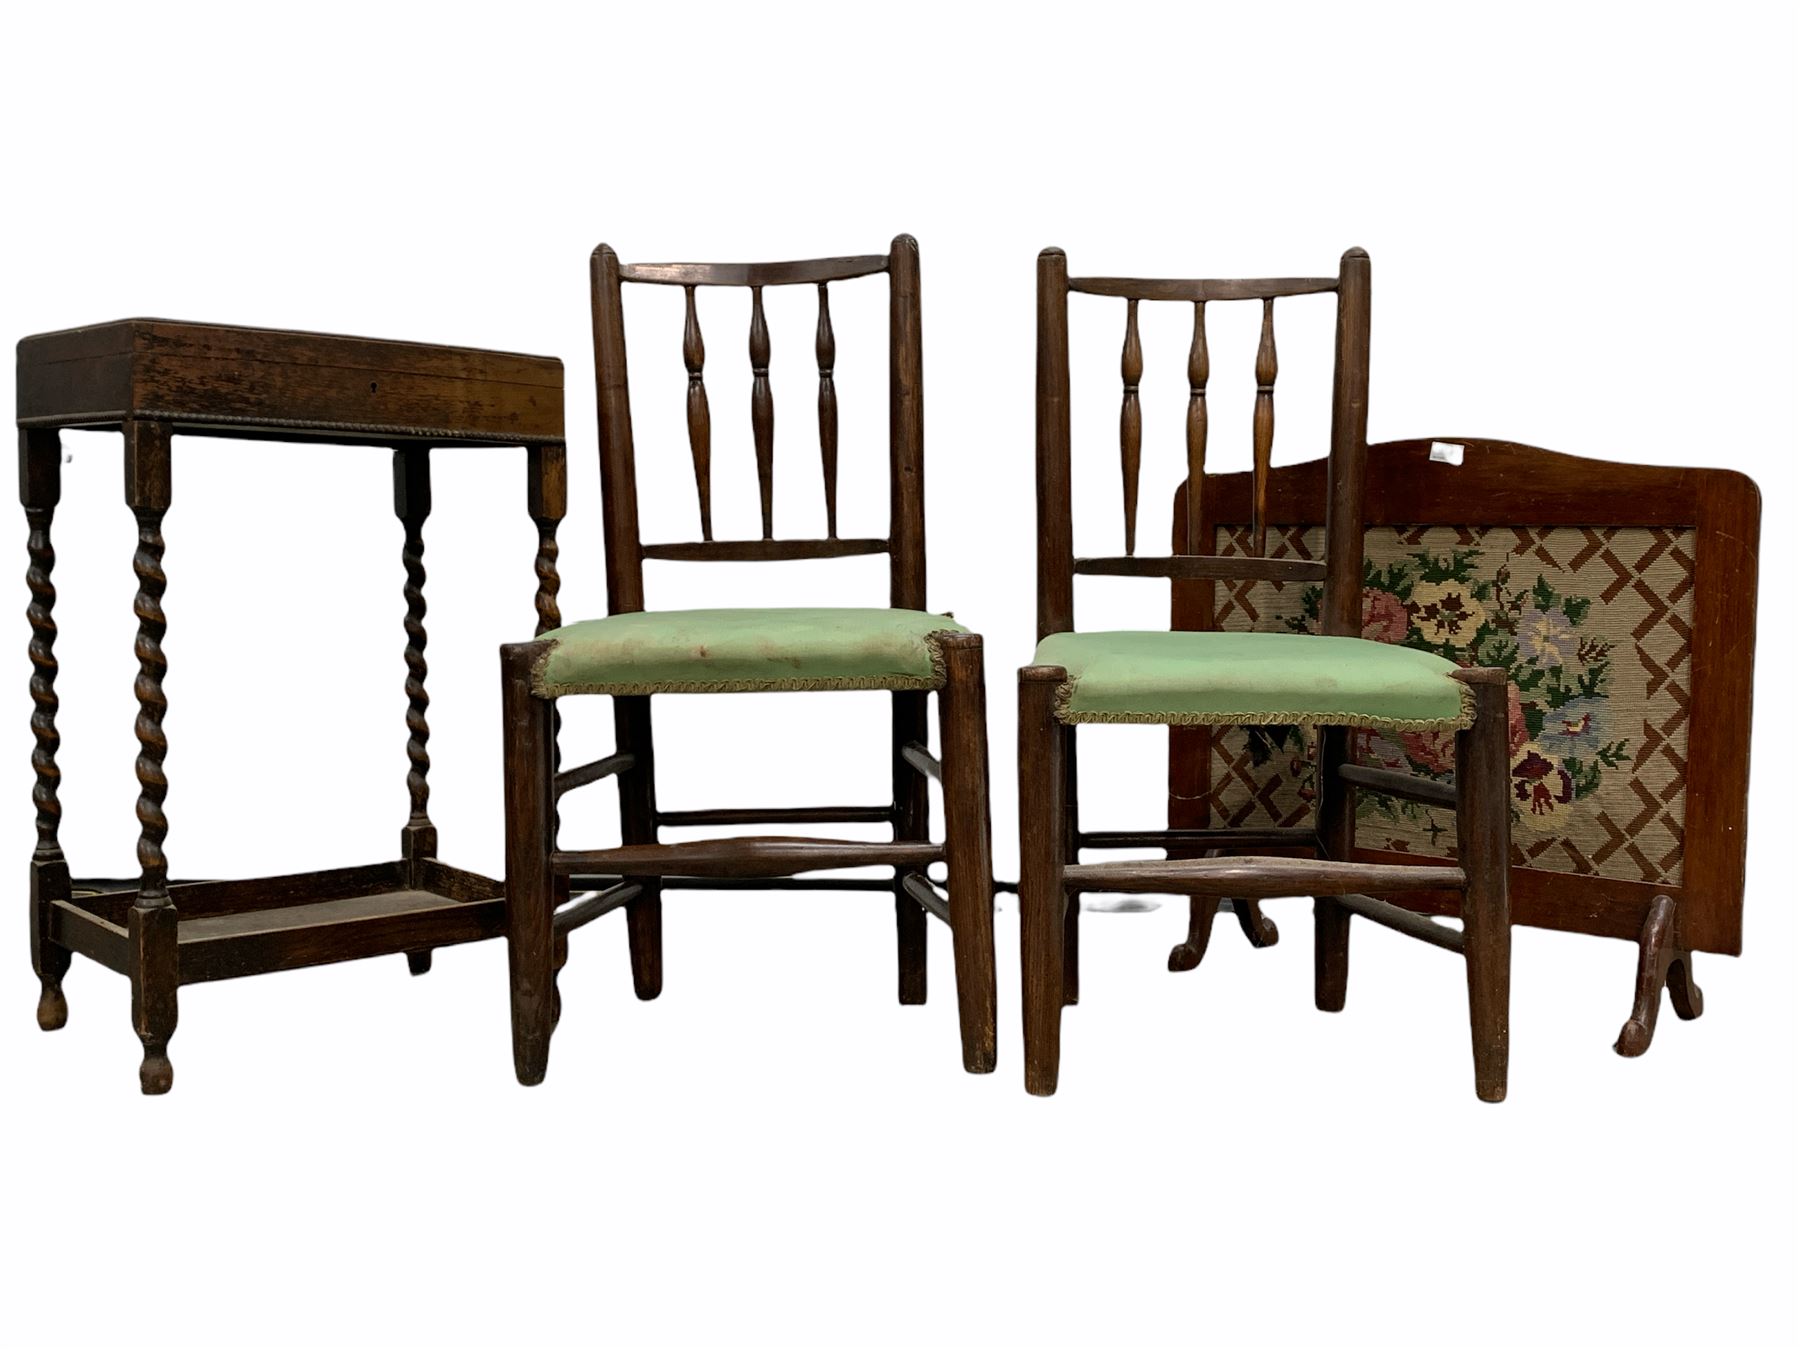 Pair of 19th century spindle back dining chairs with upholstered seats and turned supports